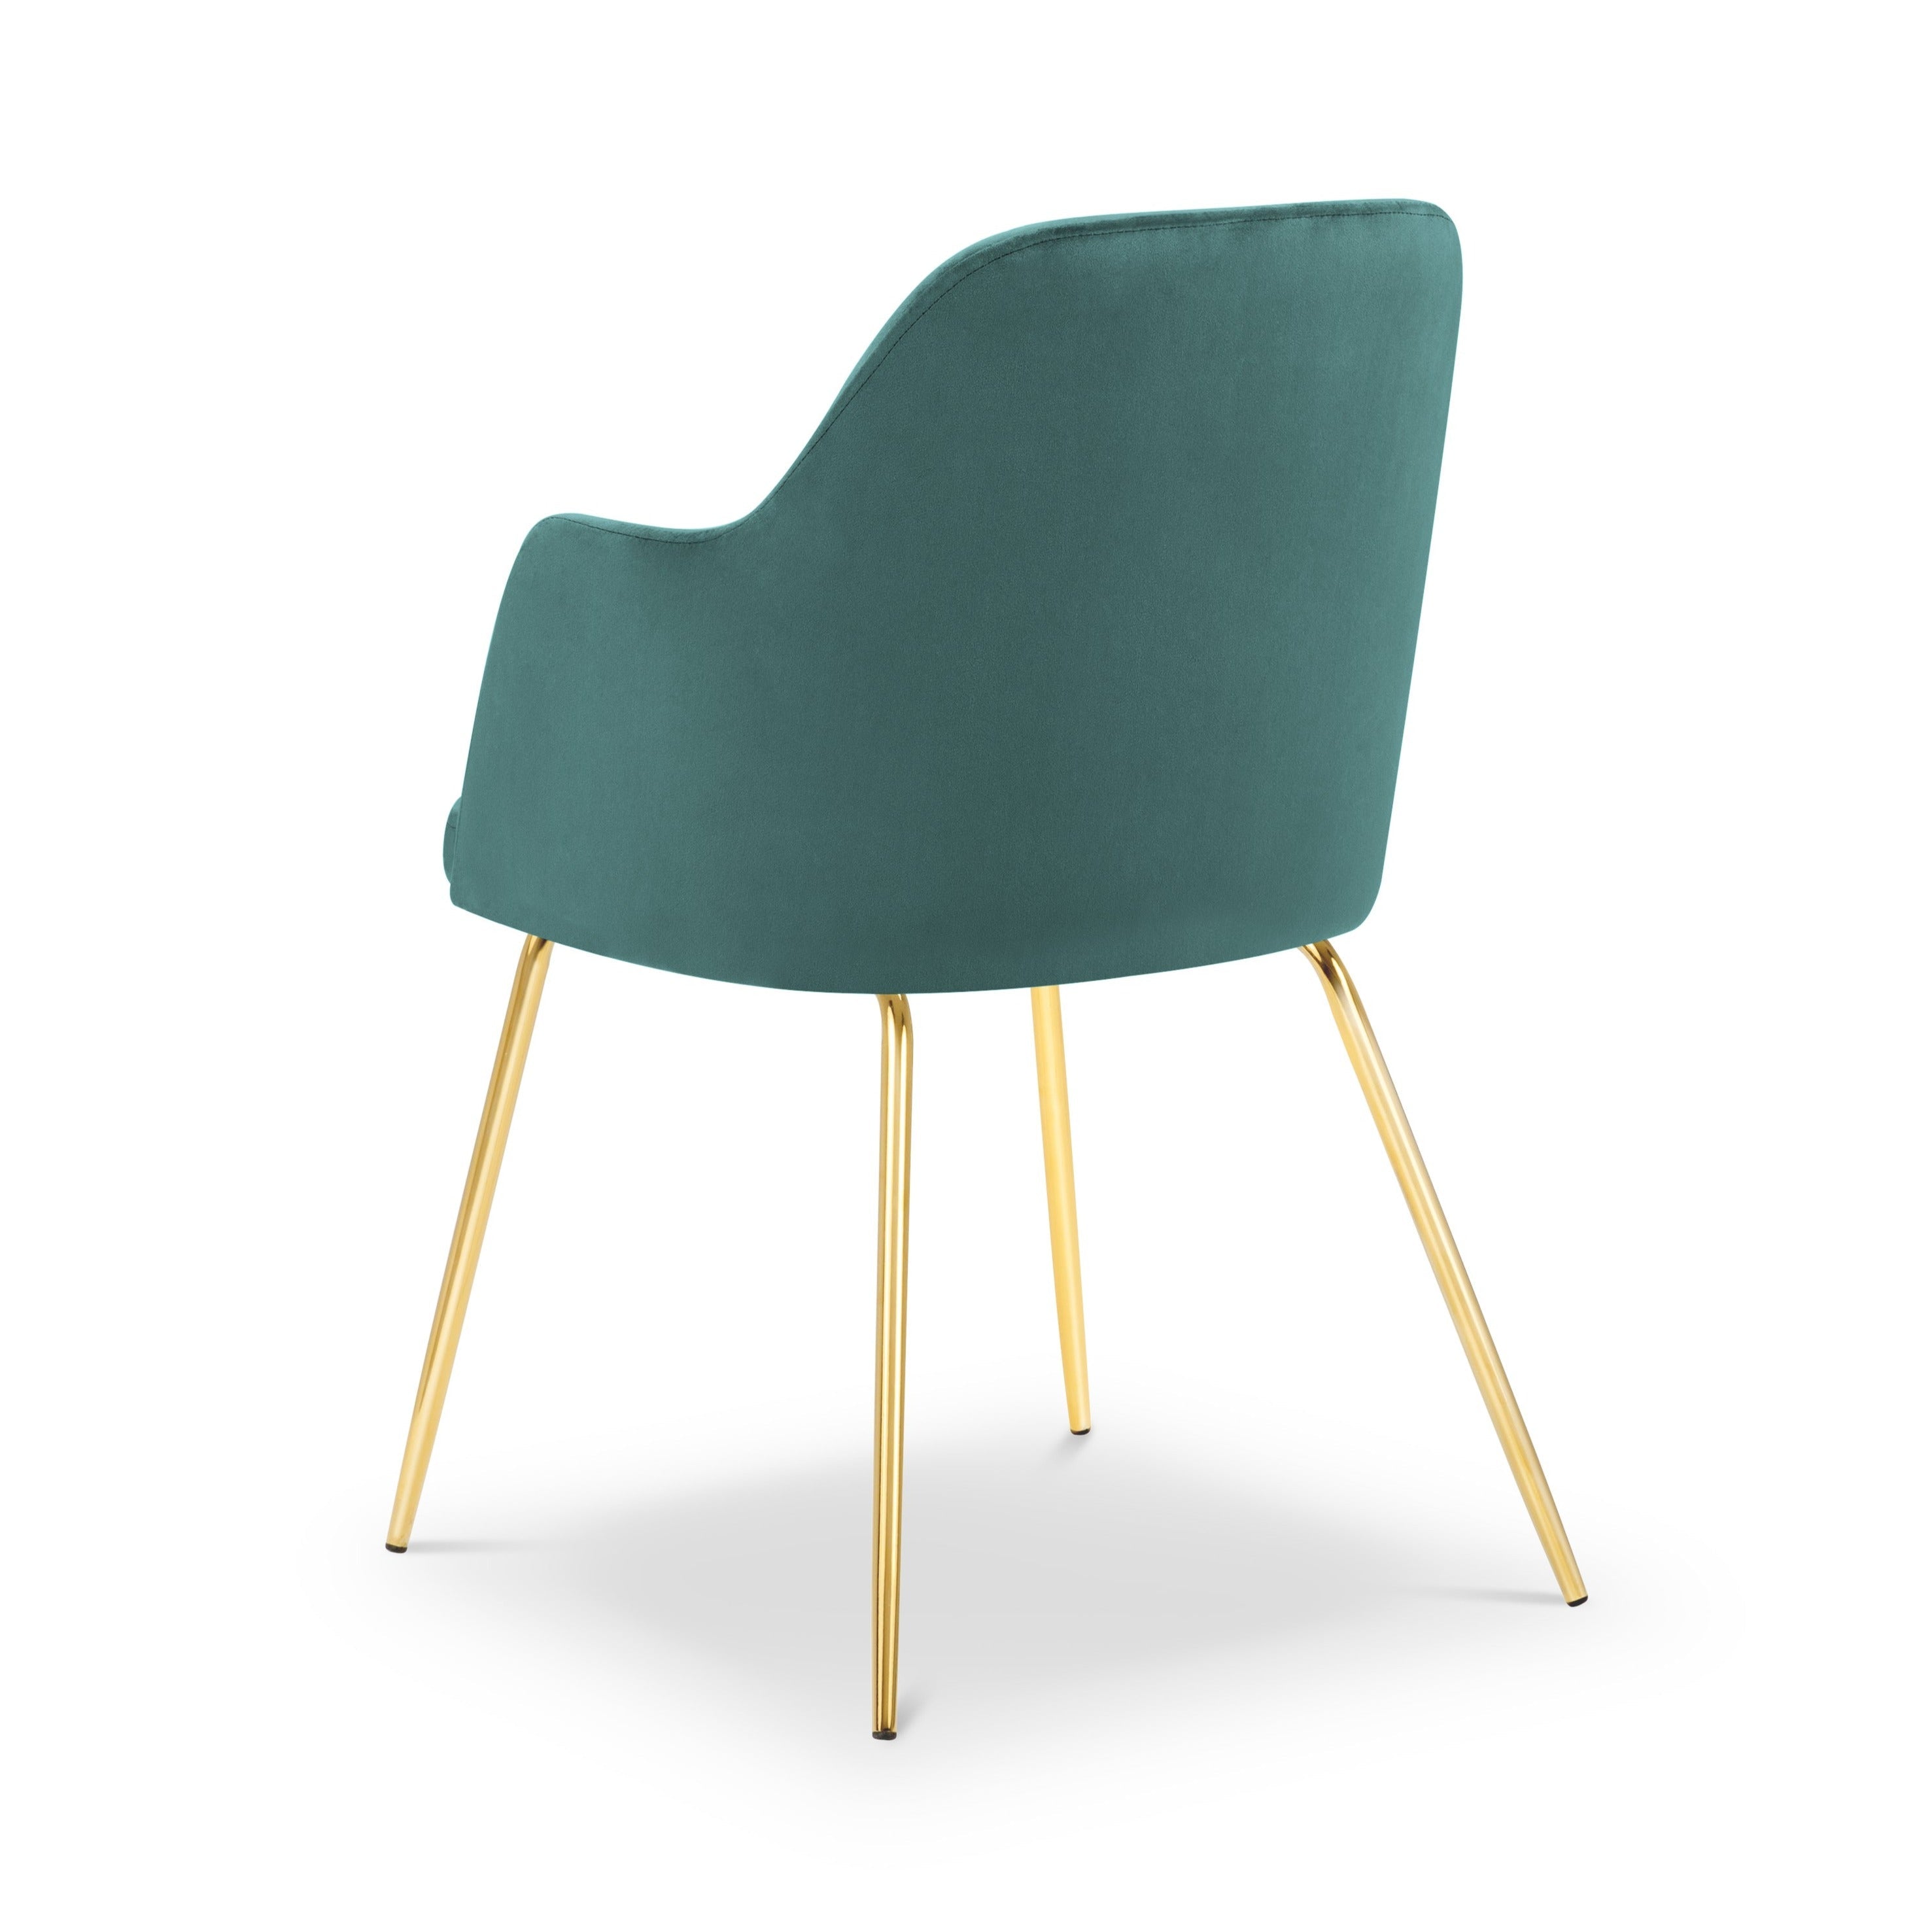 Petrol chair with a golden base